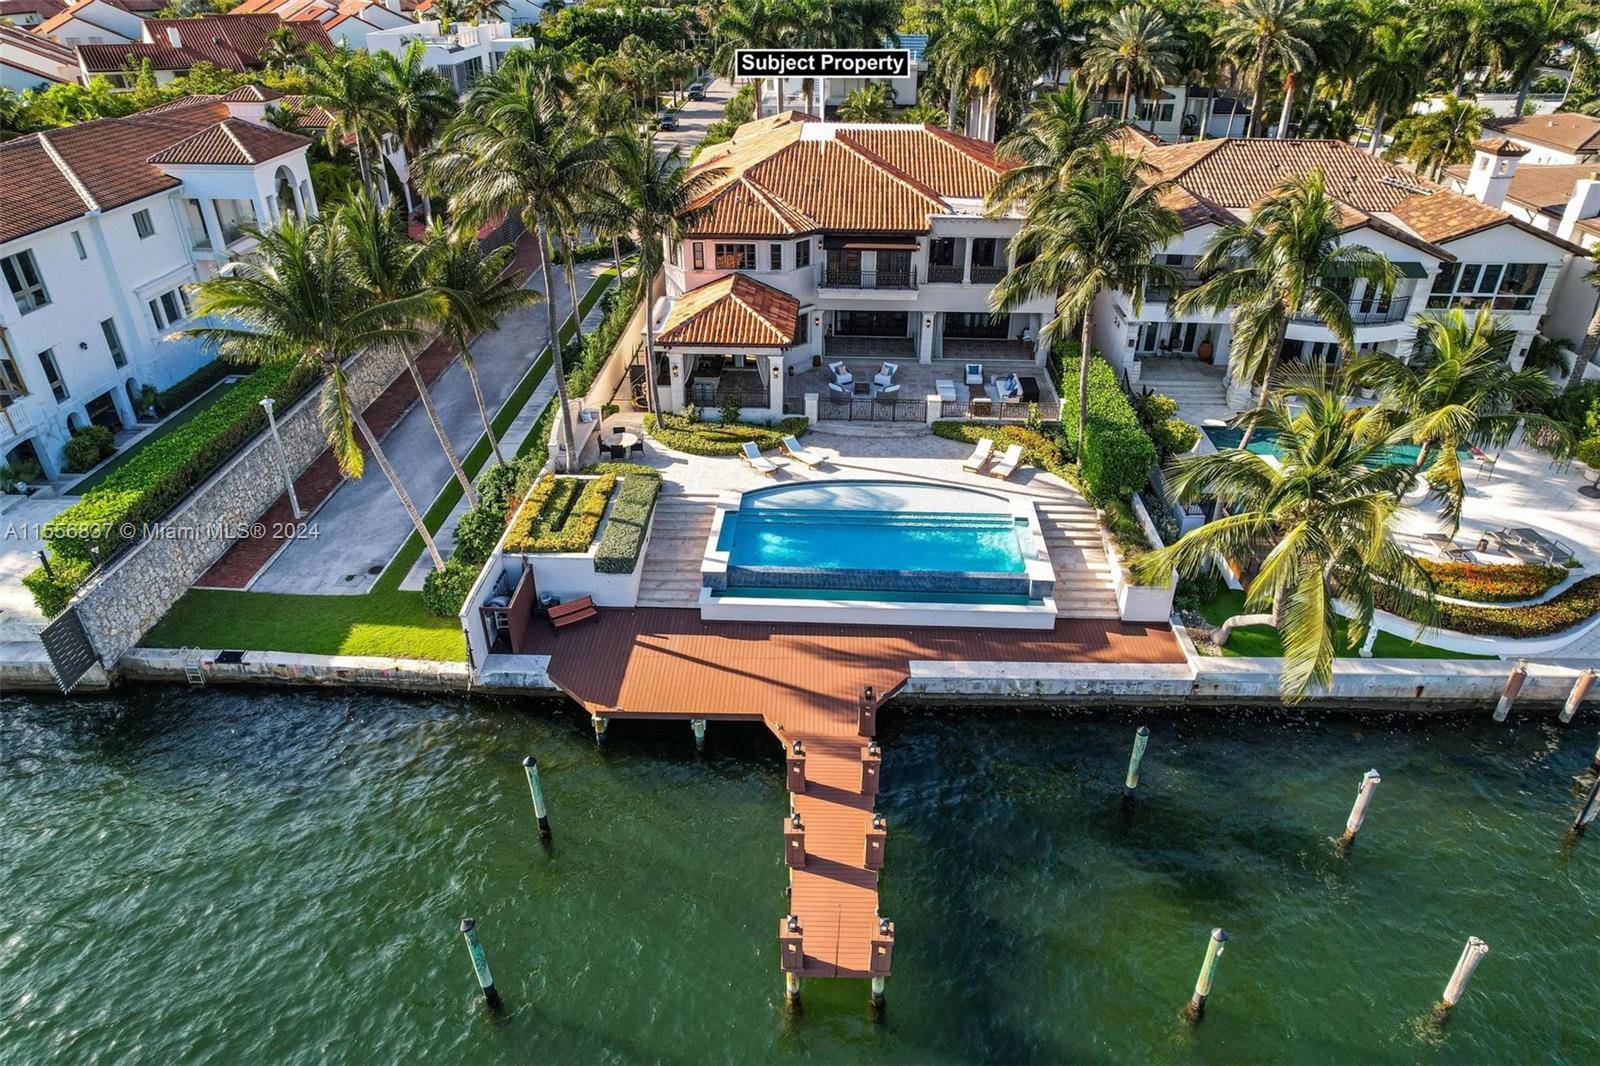 Spectacular Mediterranean home with incredible unobstructed views of Biscayne Bay.